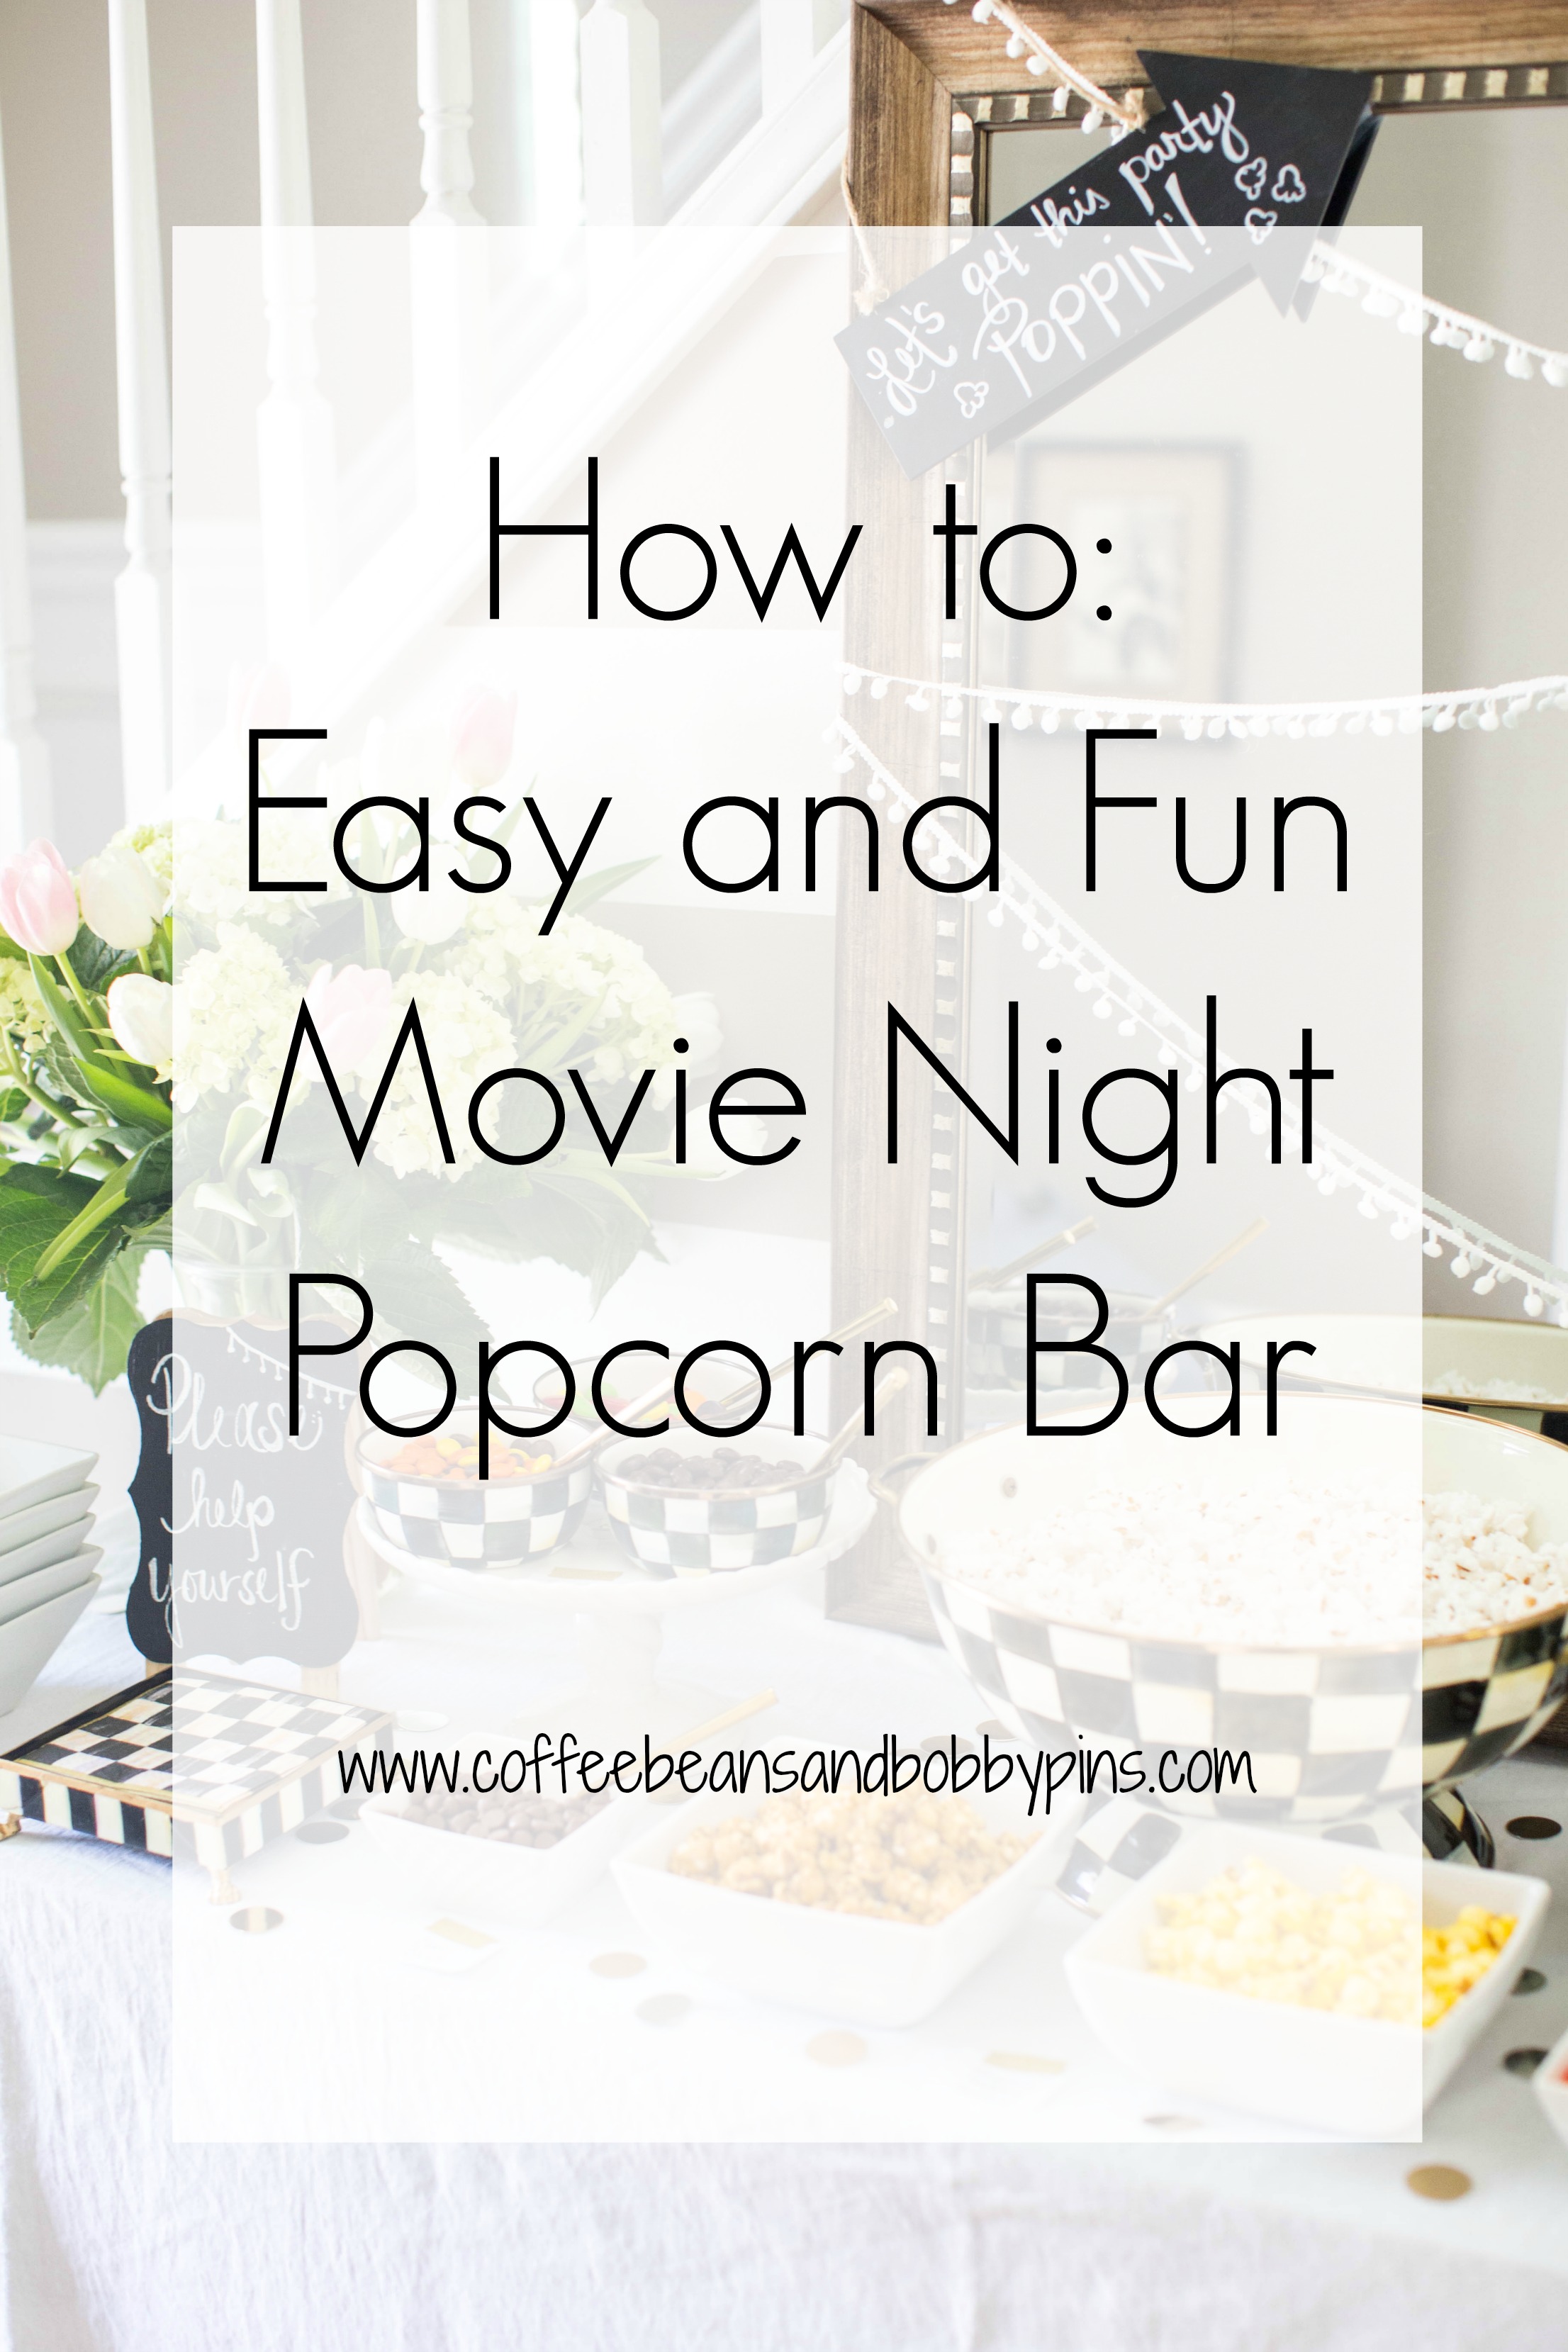 Easy and Fun Popcorn Bar by popular North Carolina lifestyle blogger Coffee Beans and Bobby Pins